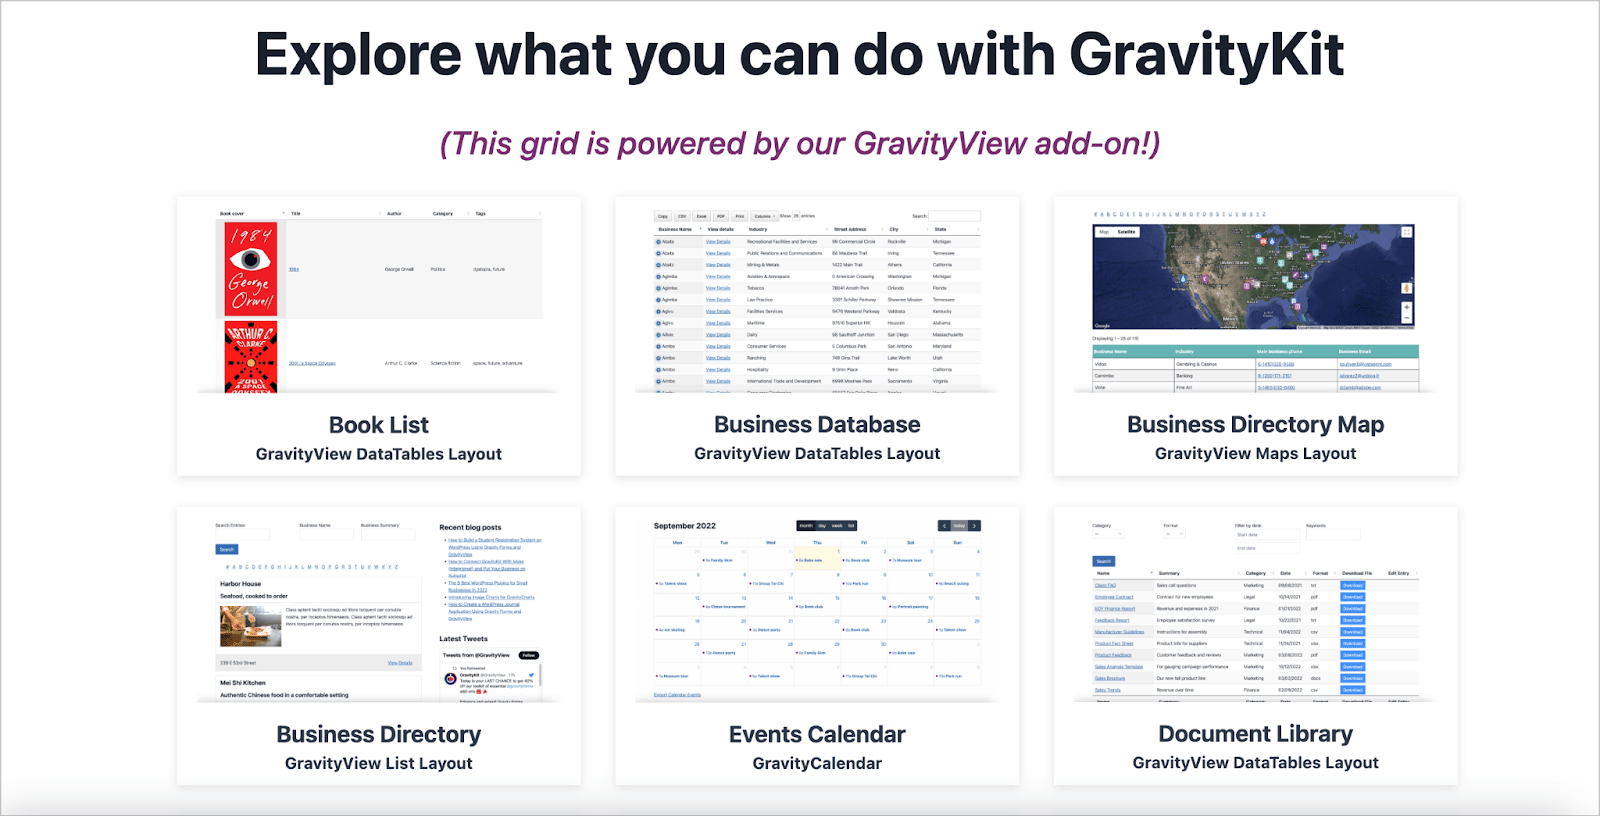 A showcase of demo applications that you can build using GravityKit plugins